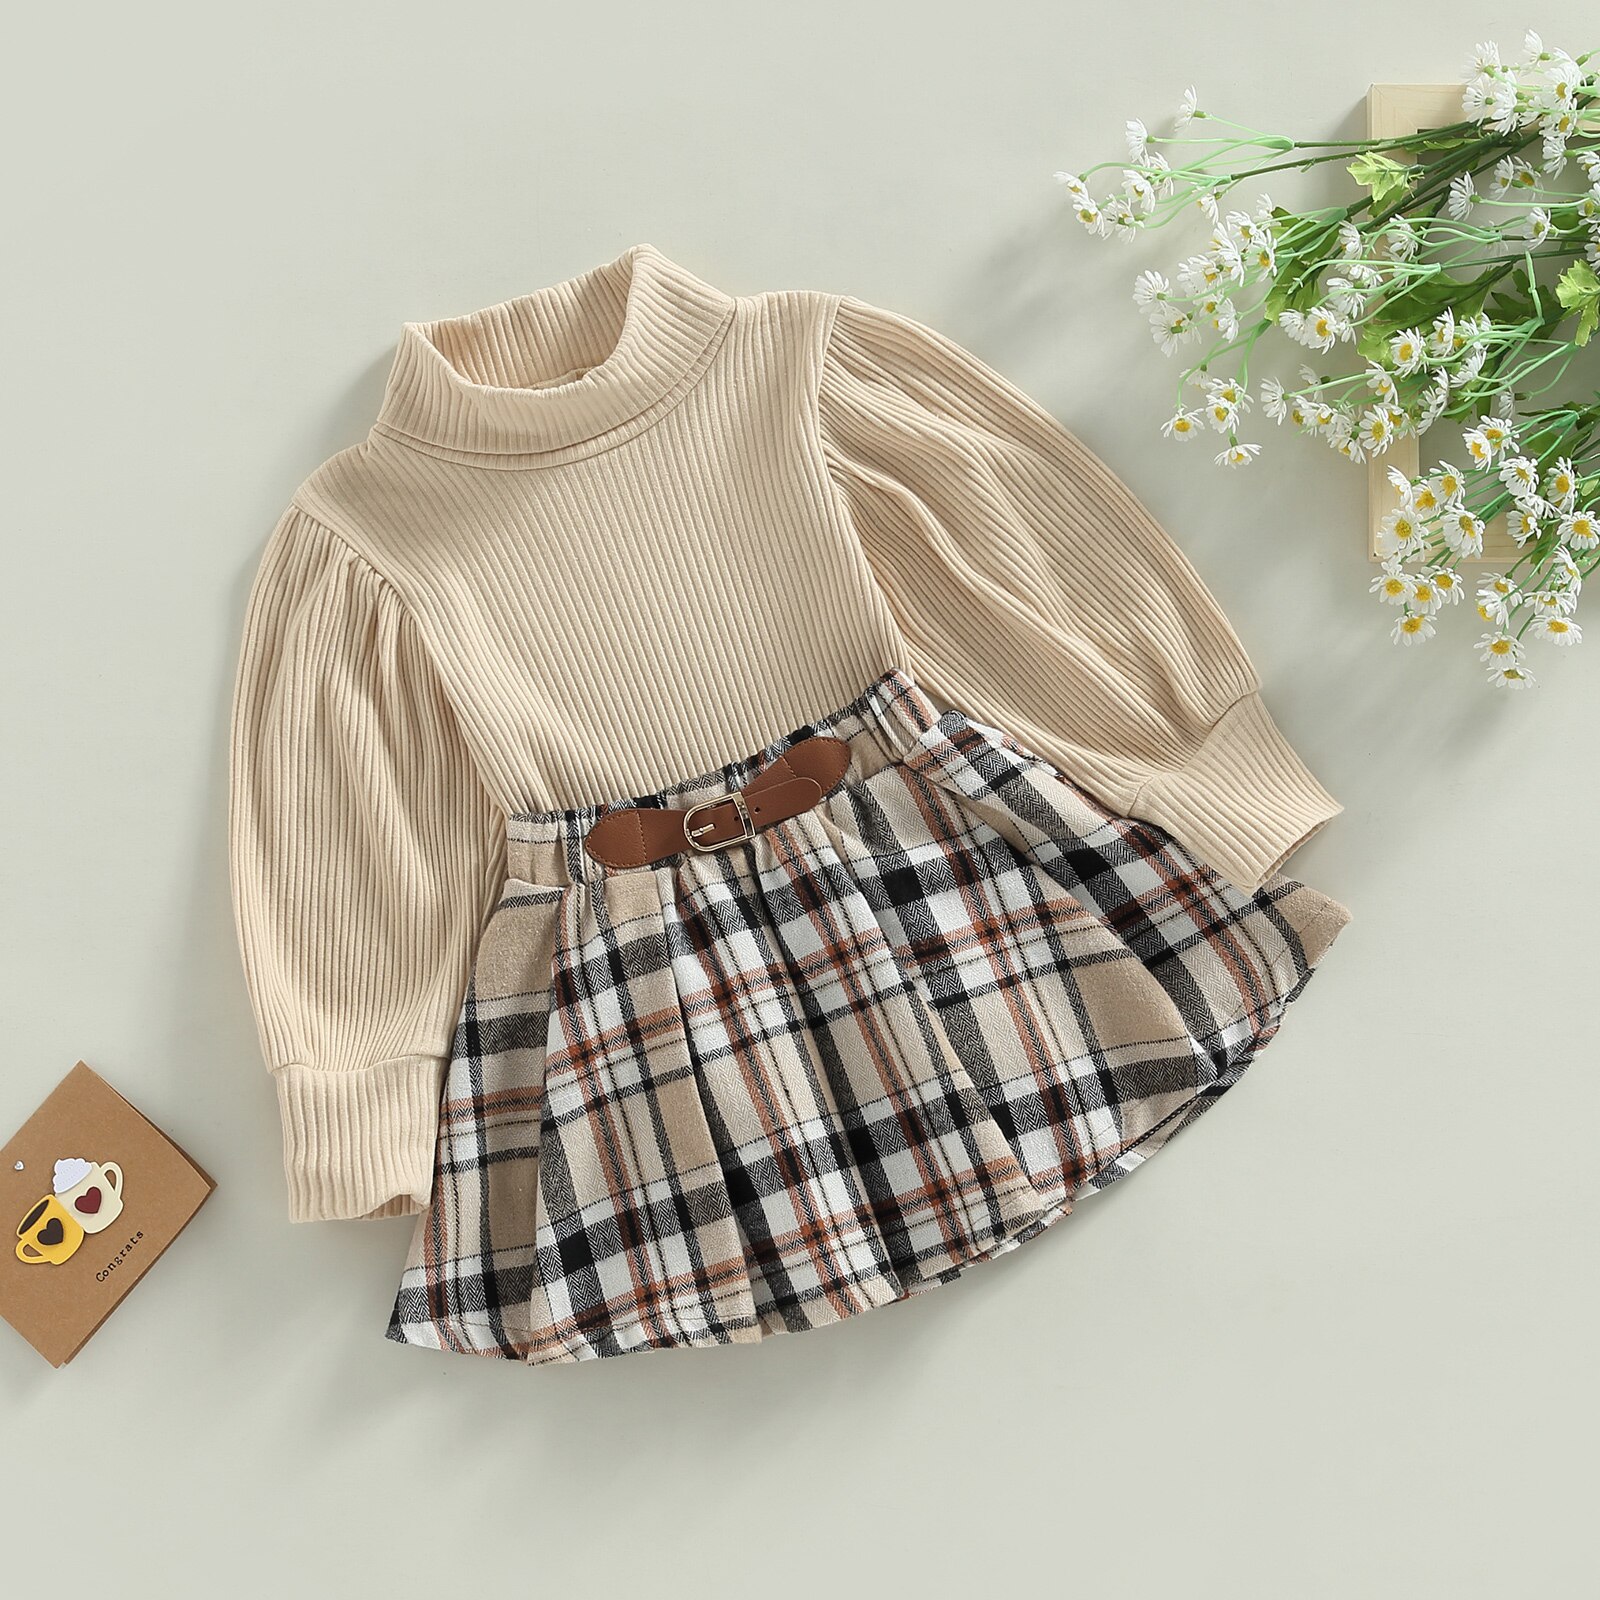 Citgeett-Autumn-Kids-Toddler-Girls-Outfit-Sets-Solid-Color-Long-Sleeve-Tops-A-line-Plaid-Skirt-1